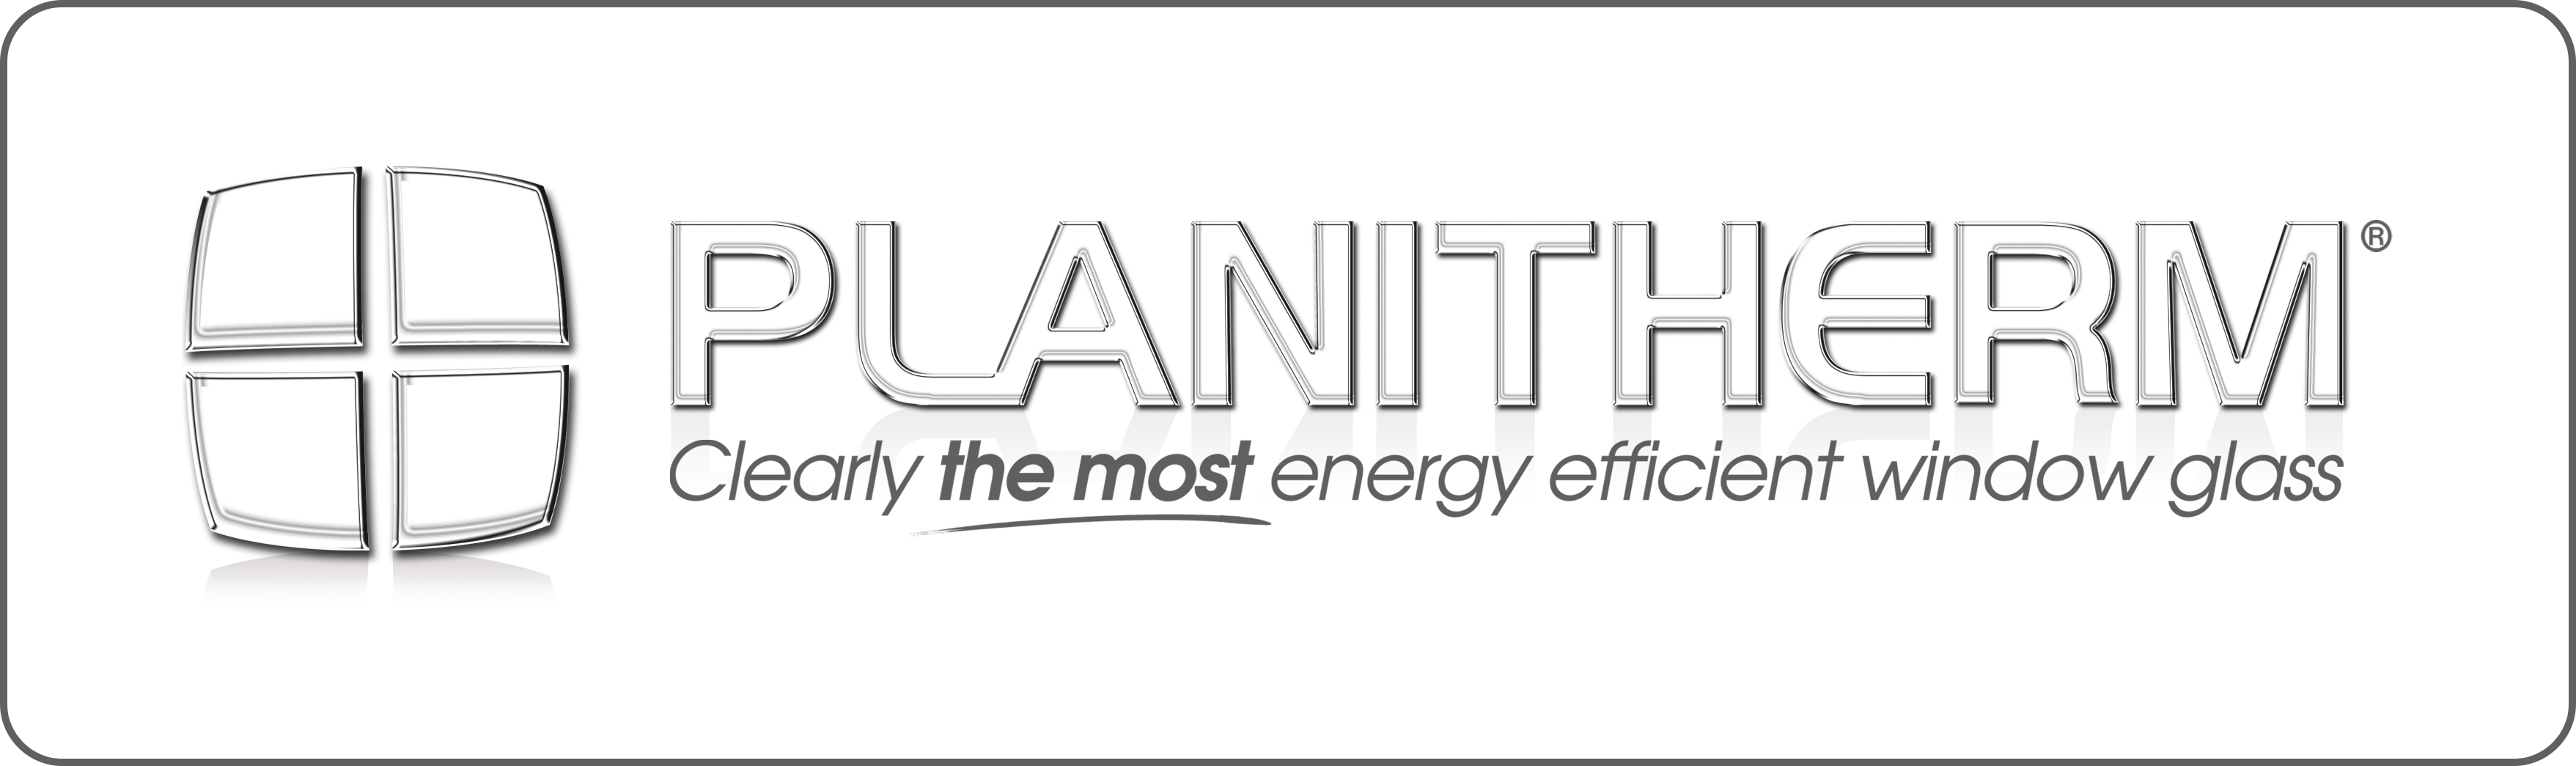 Planitherm reseller